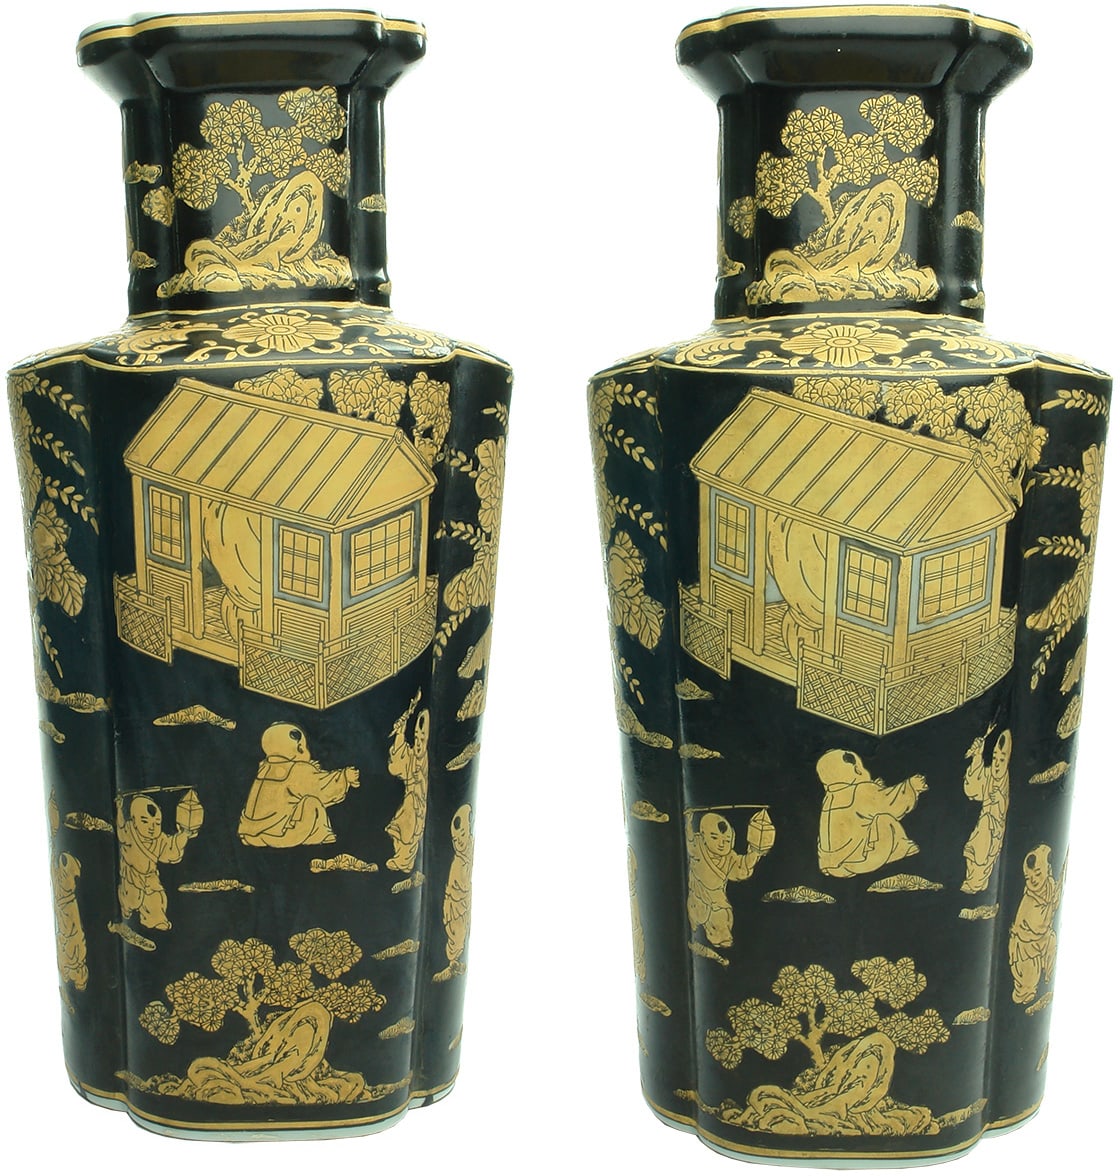 Black and Gold Chinese Vases